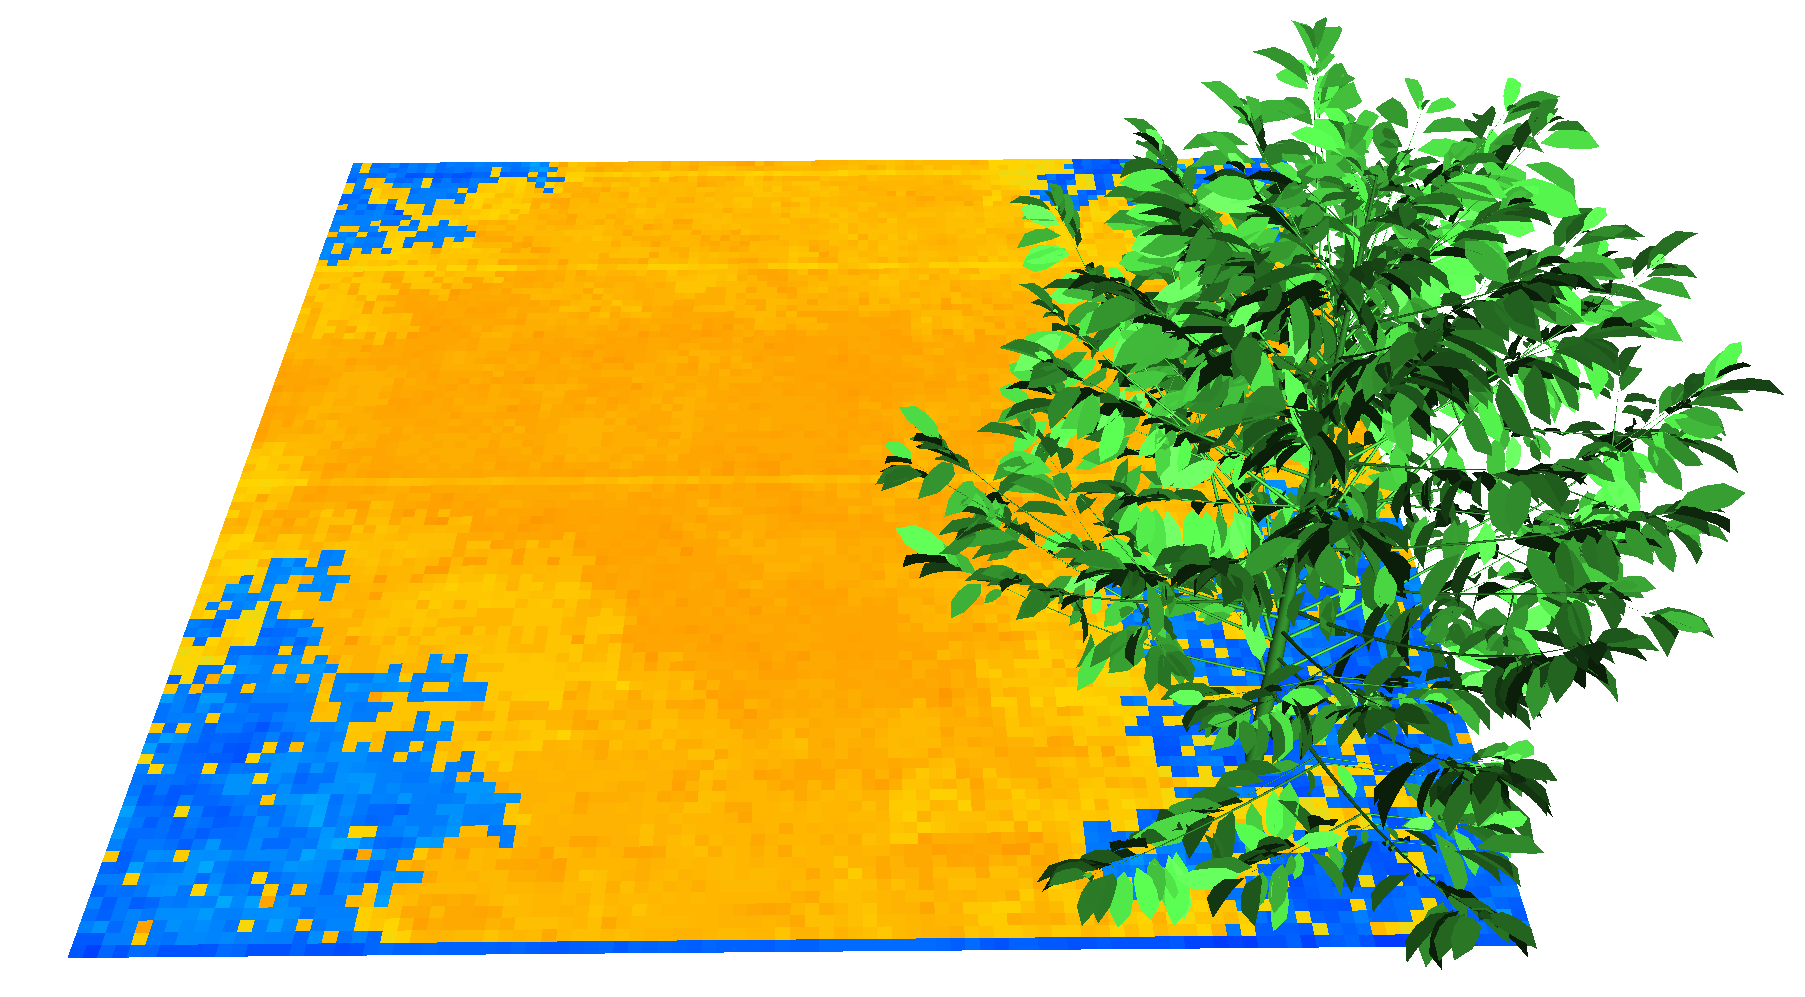 A coffee tree in a toric 3x3m scene. The soil is colored by Ra_PAR_f, the absorbed PAR in W m_{component}^{-2}.